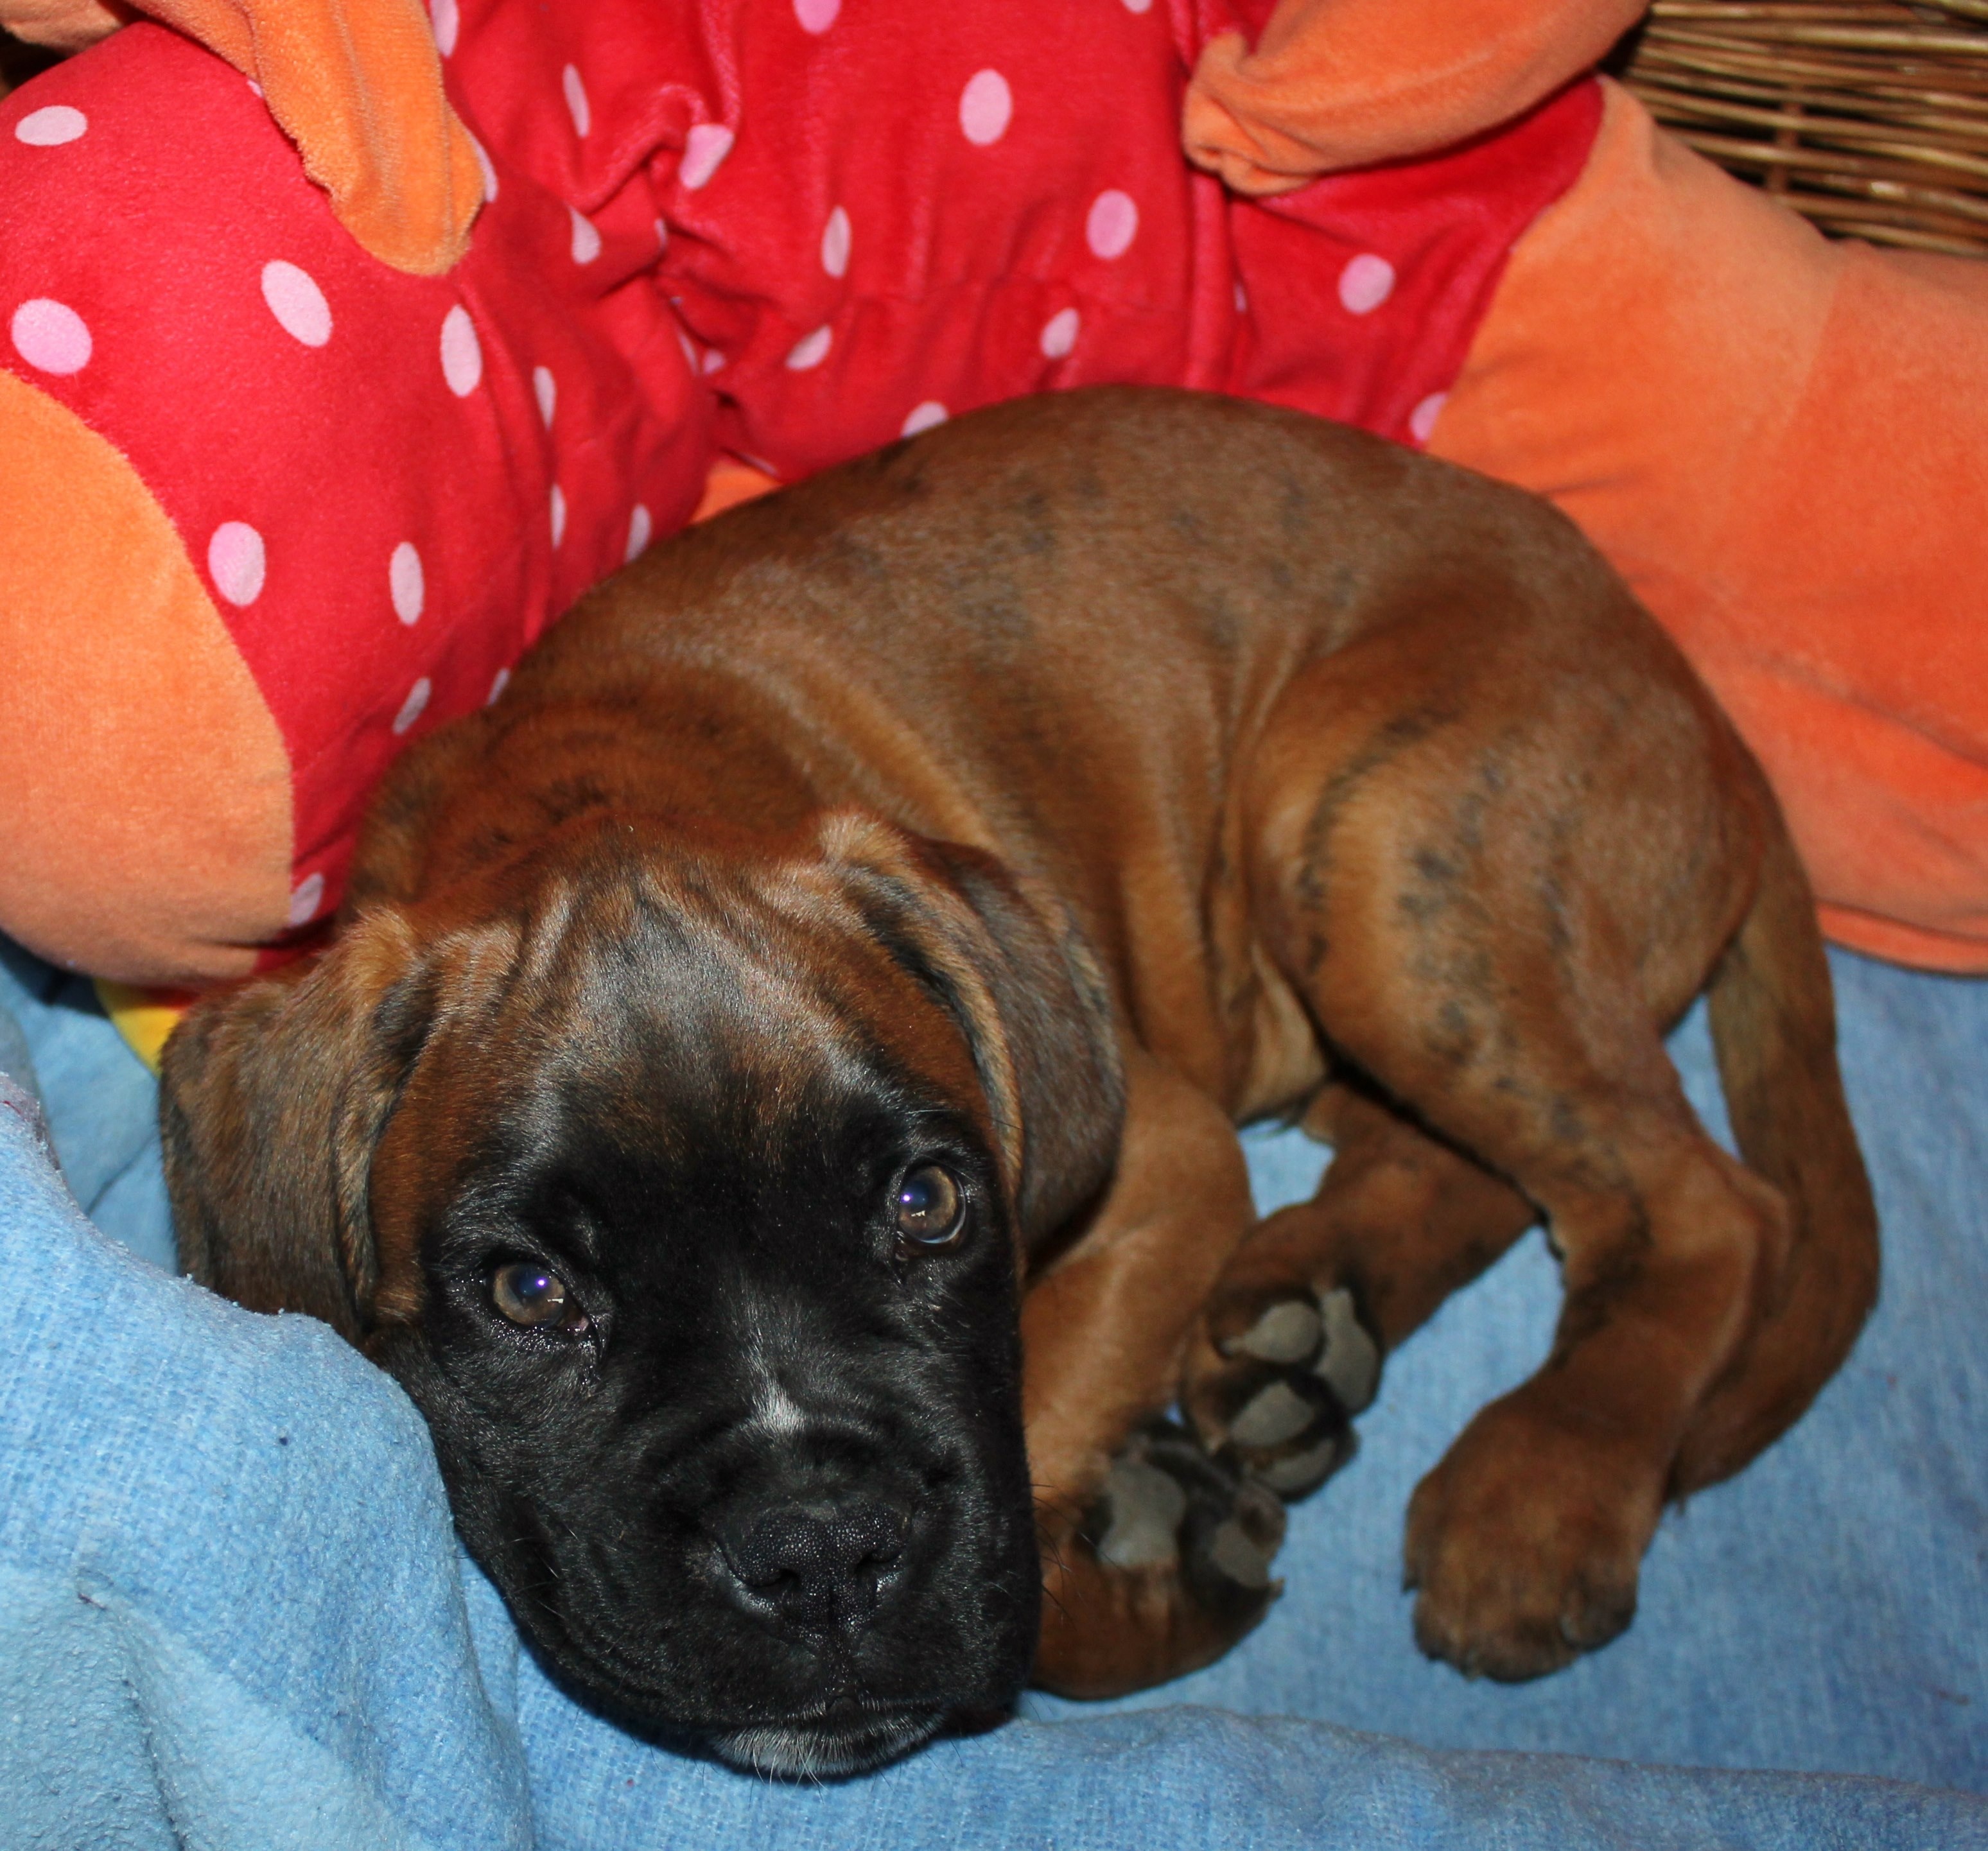 tan and black short coated puppy